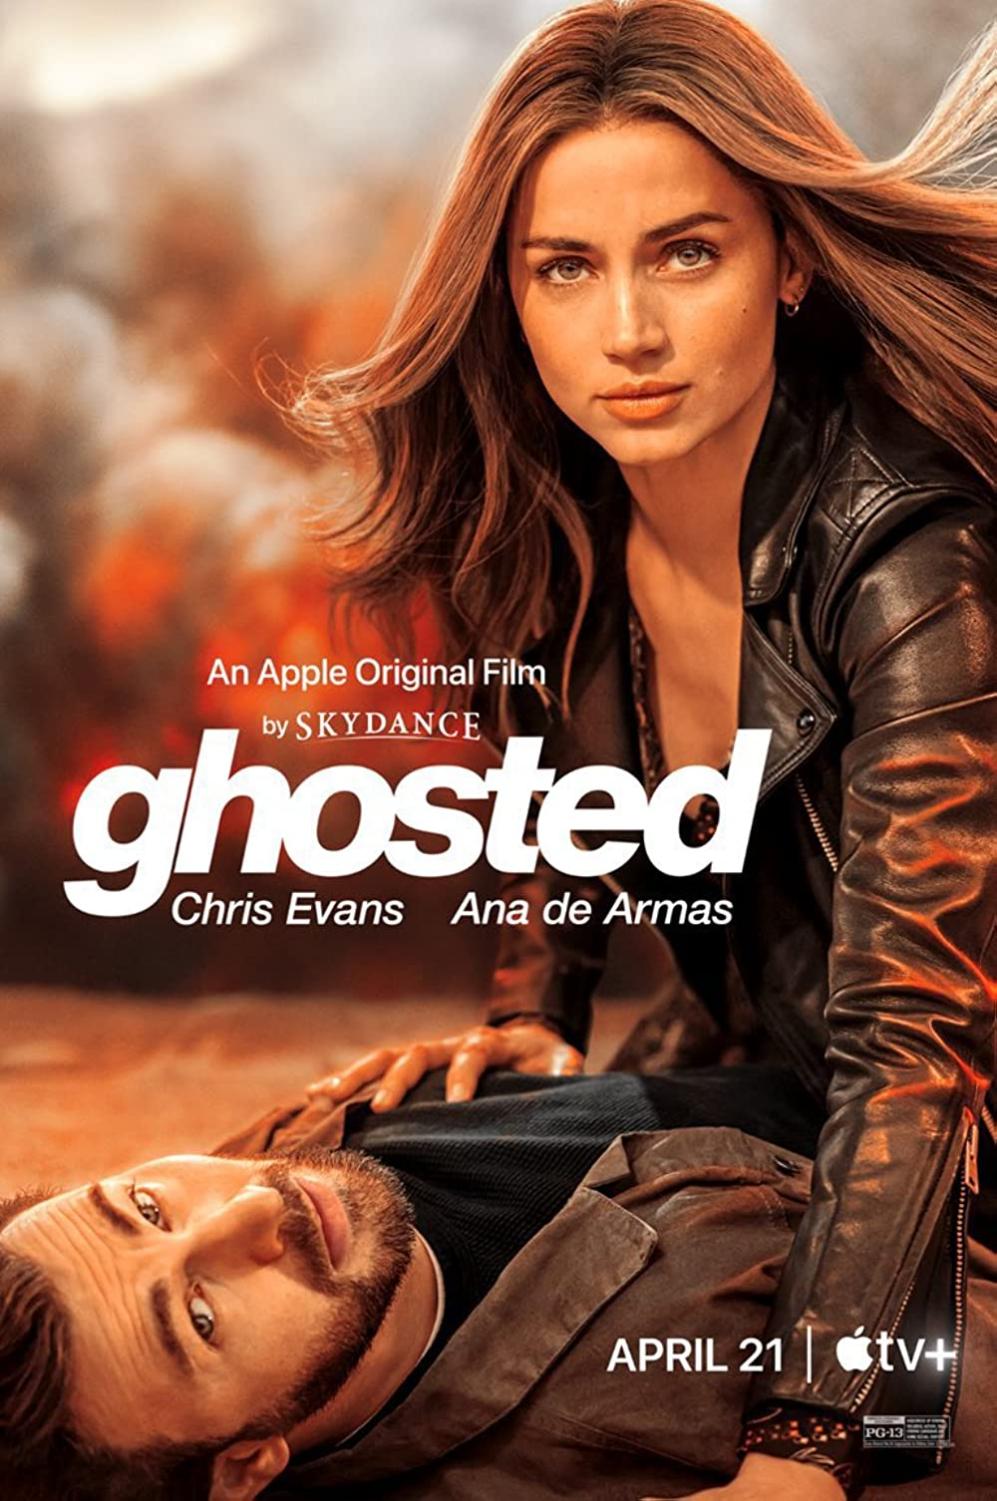 Action Star Ana de Armas Doesn't Want to Be Typecast as an Action Star